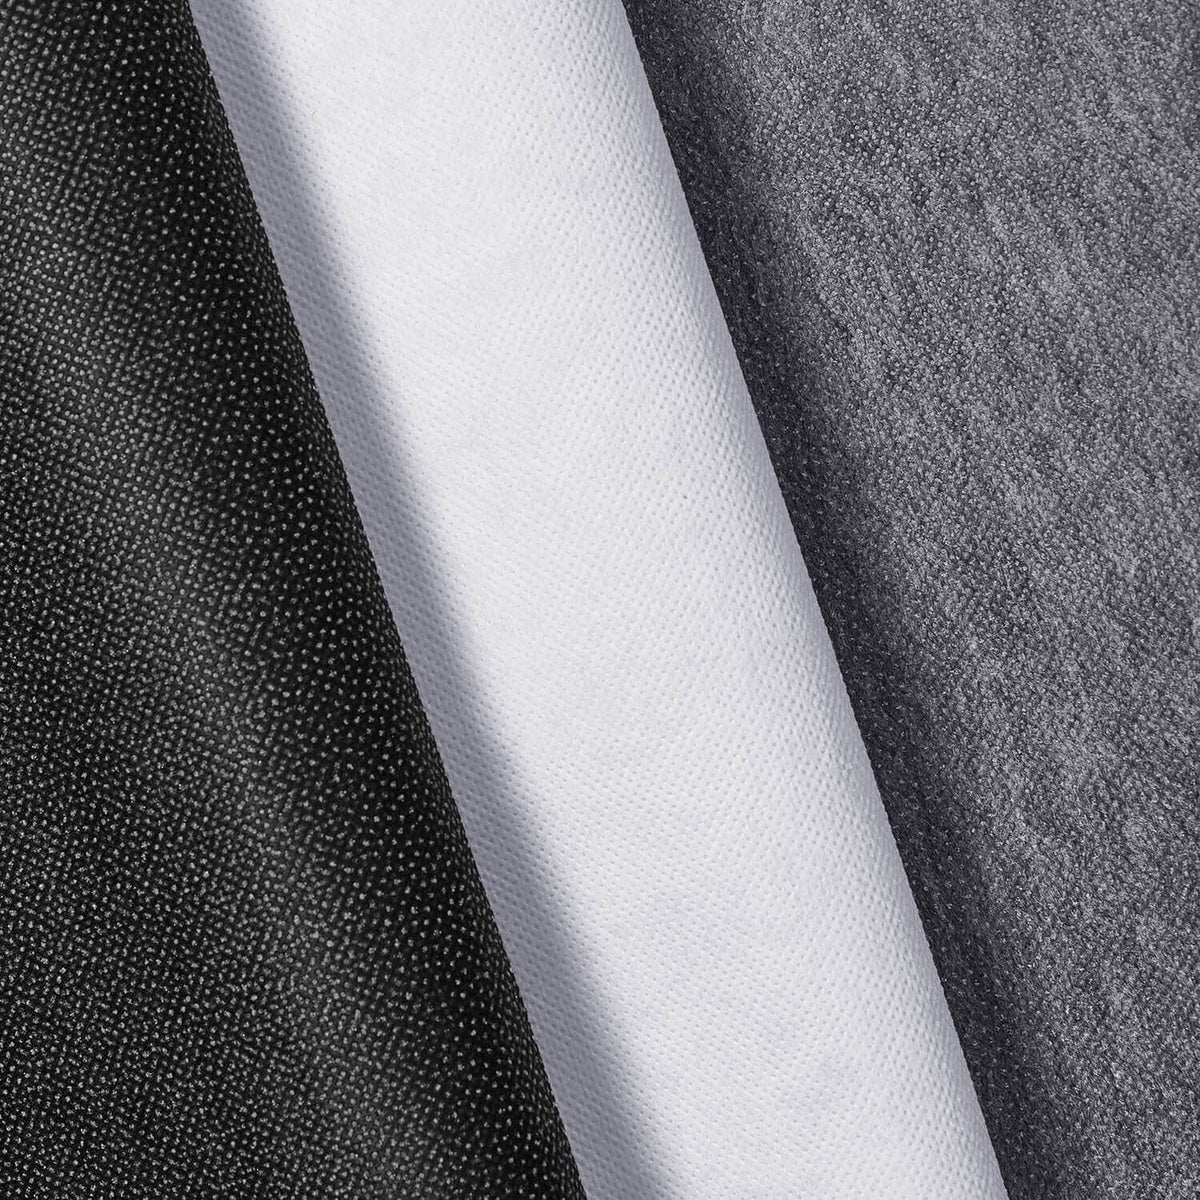 1 Yard Charcoal Gray Interfacing Non Woven 45g/sqm One Side Fusible  58-60Wide